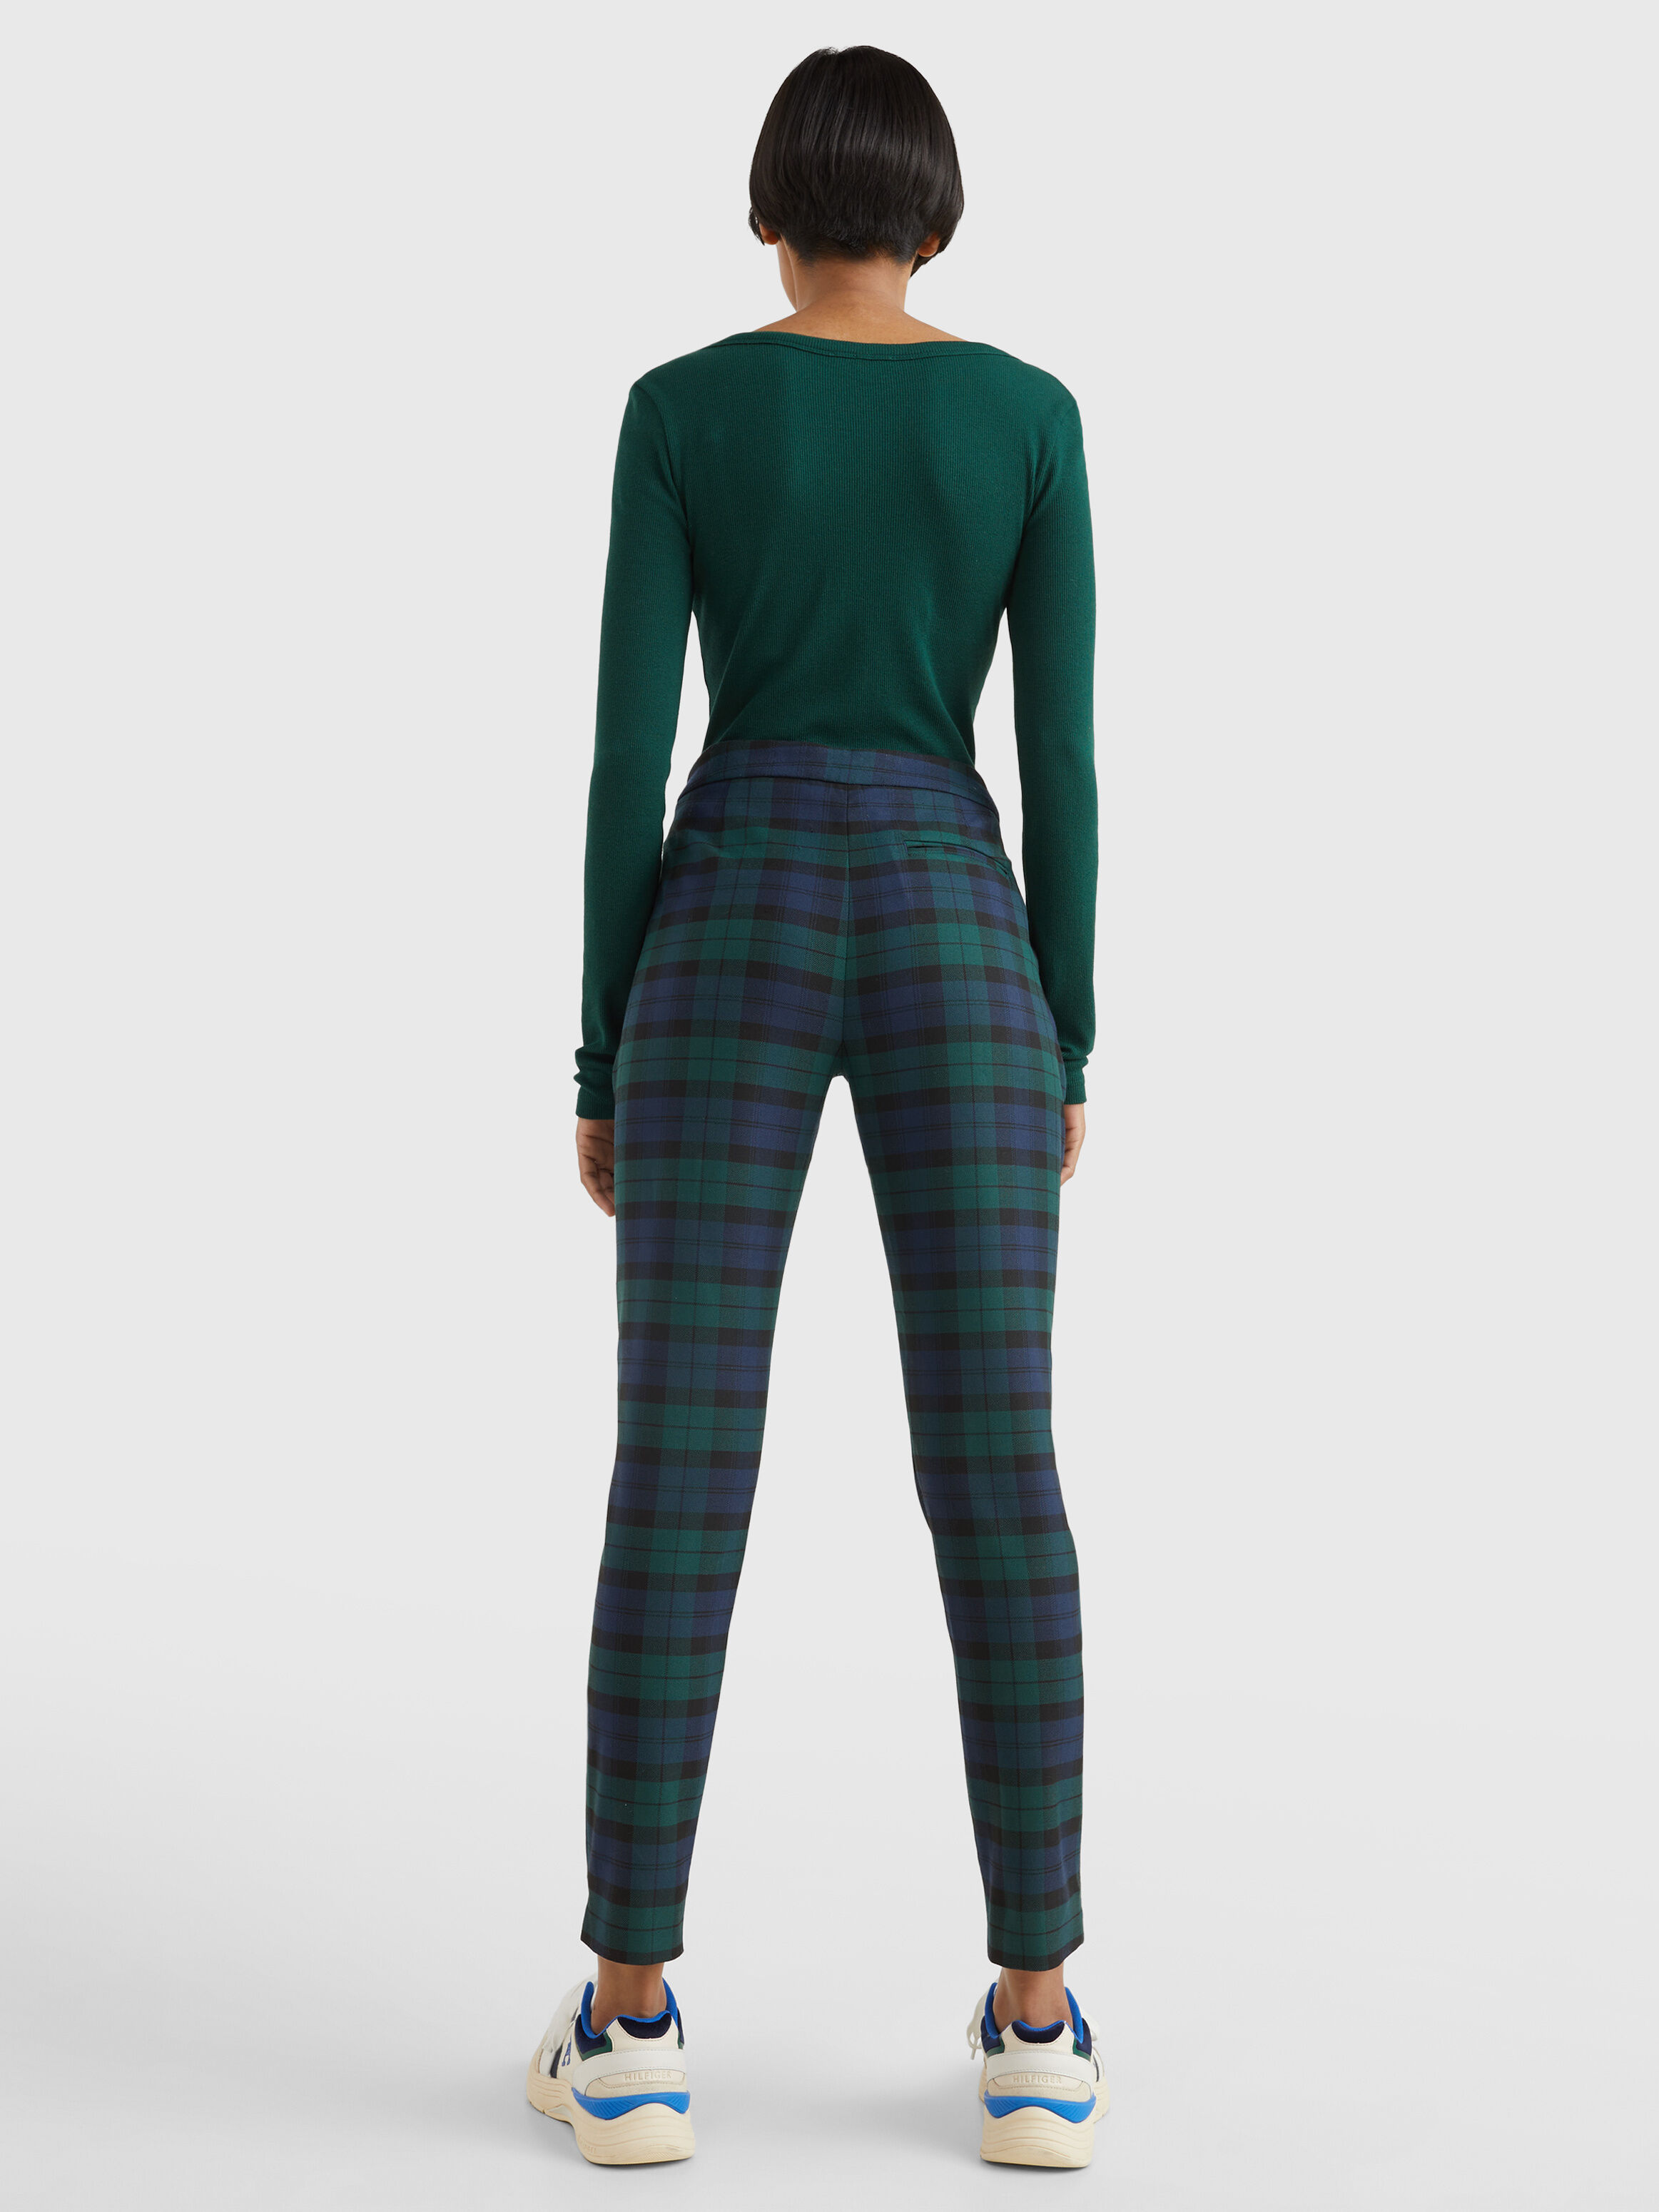 Limehaus | Navy & Green Tartan Skinny Fit Trousers | Suit Direct